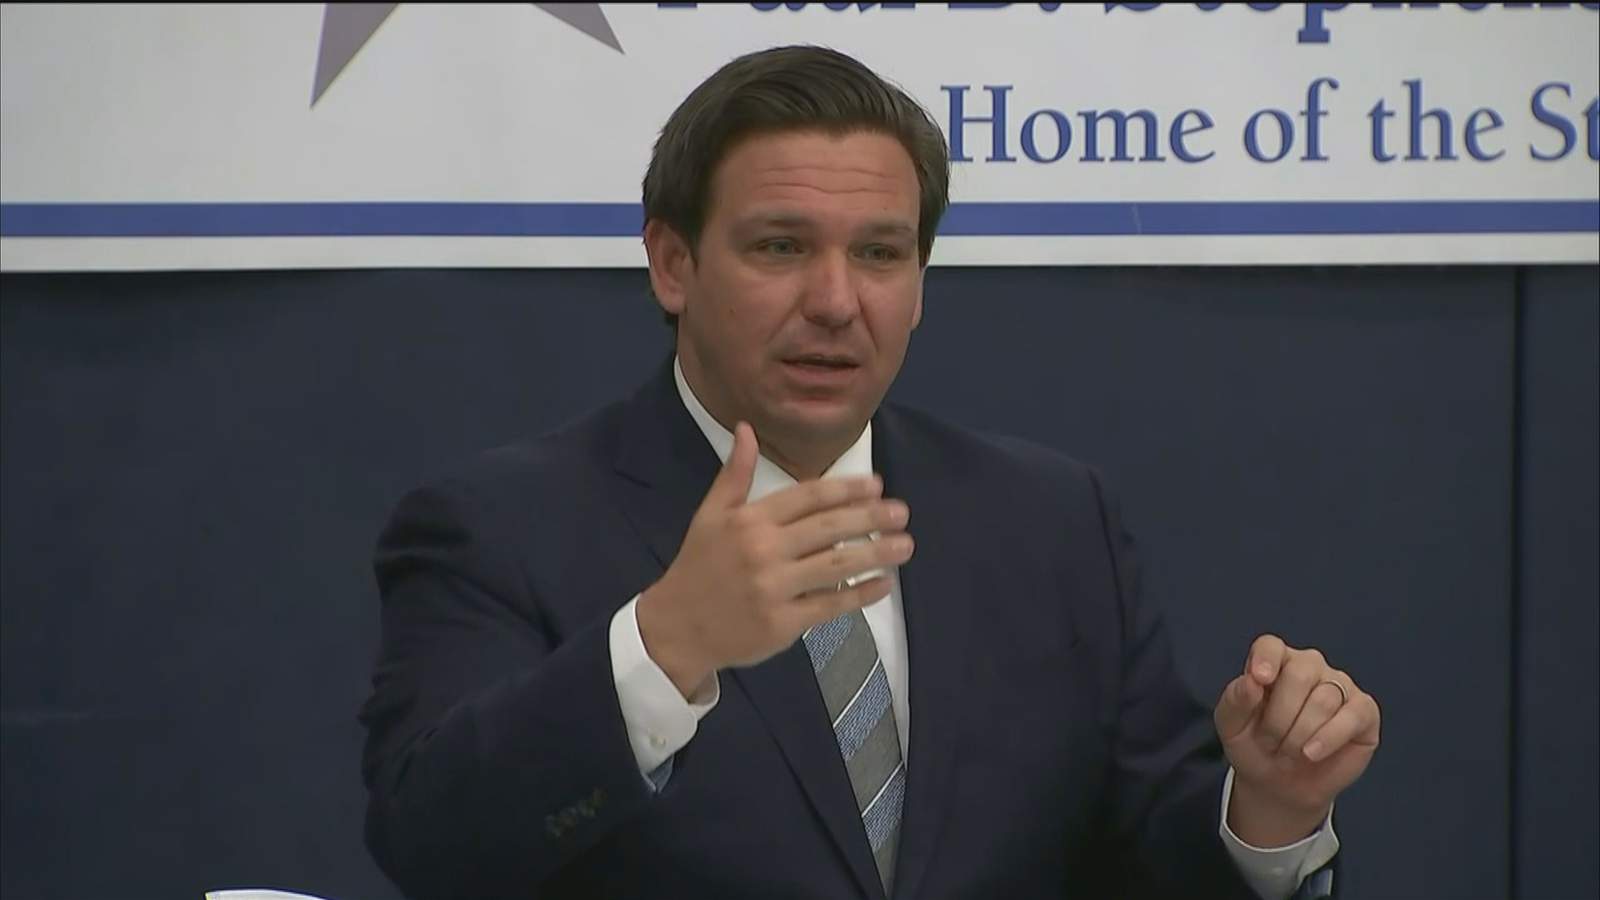 WATCH: Gov. Ron DeSantis holds education, coronavirus roundtable in Clearwater